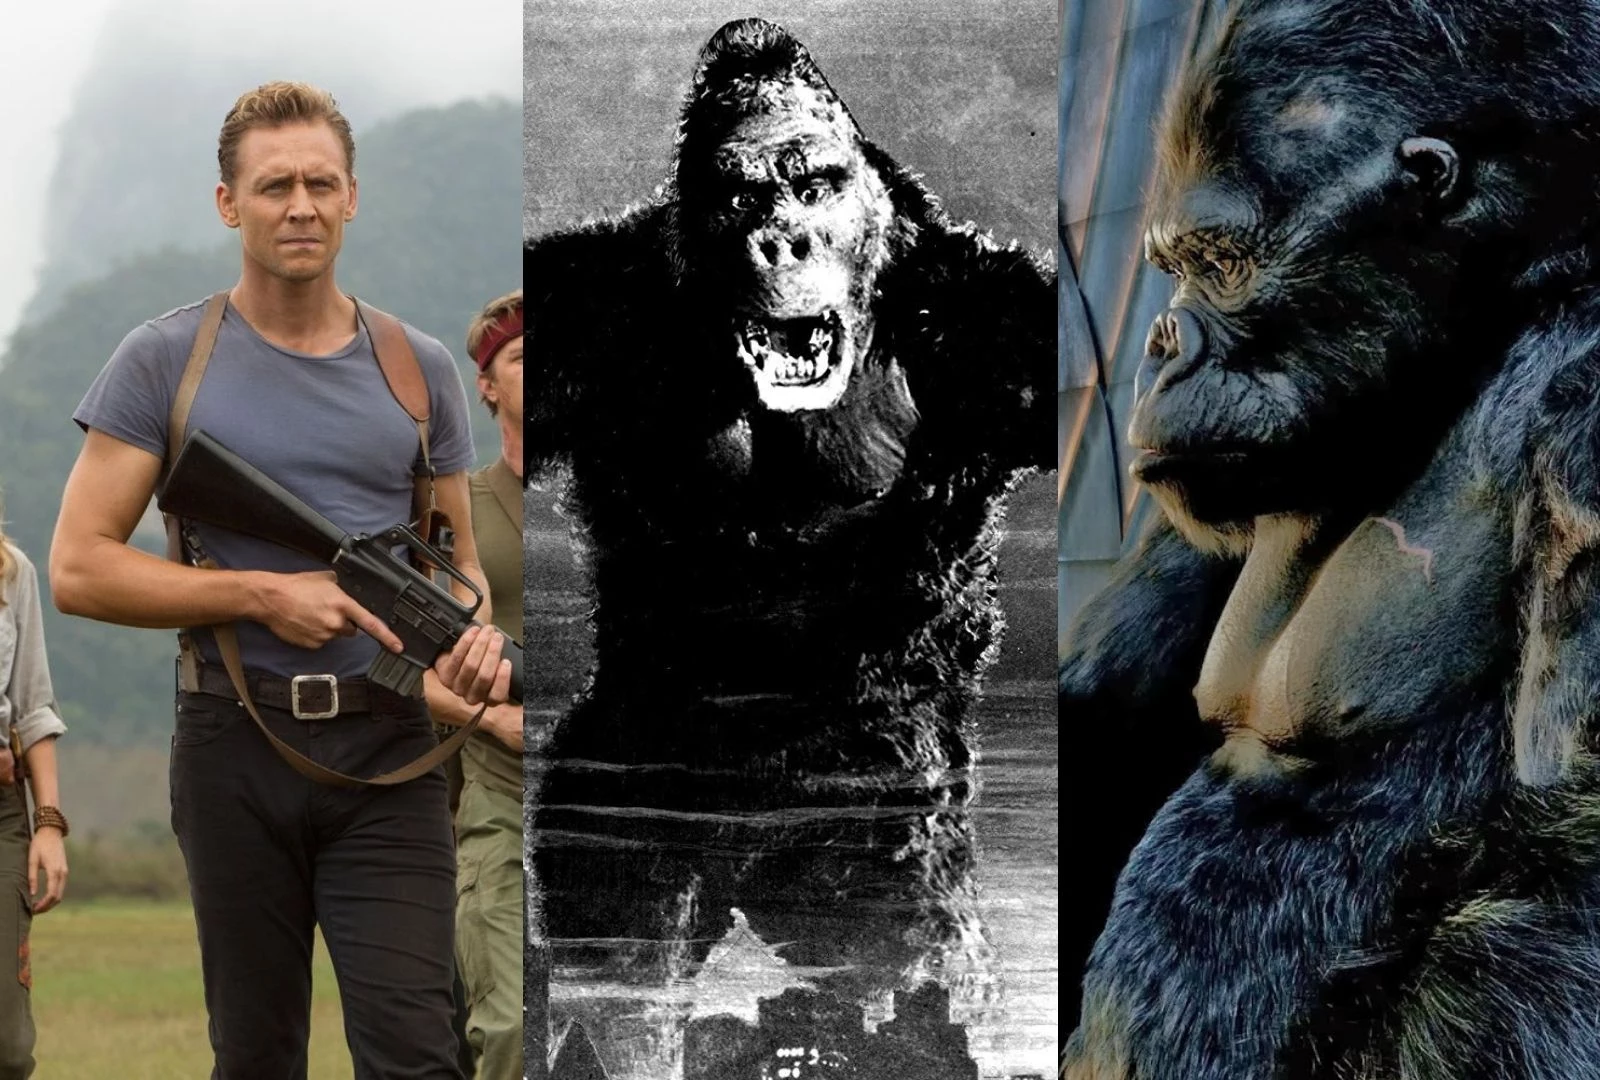 https://townsquare.media/site/442/files/2021/03/Every-King-Kong-Movie-Ranked-From-Worst-to-Best.jpg